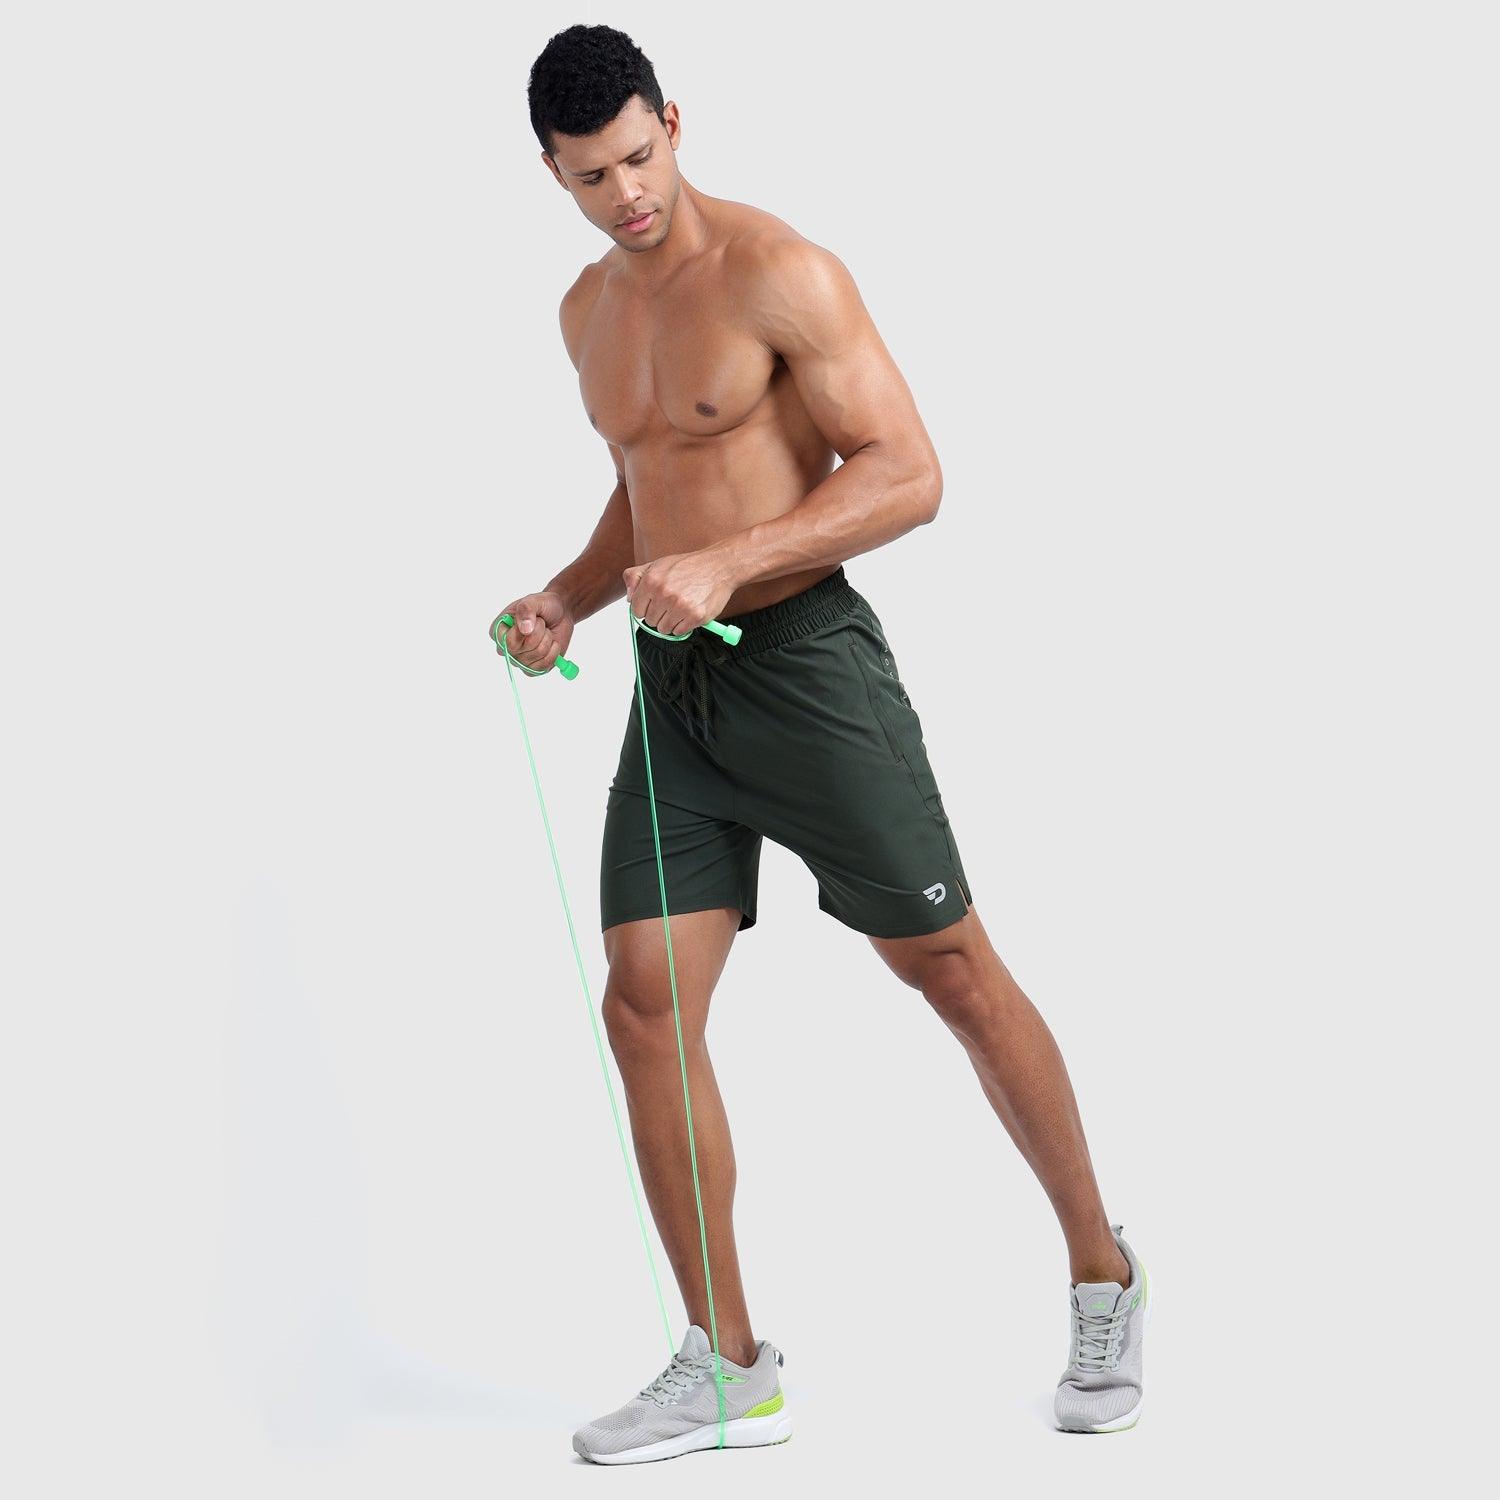 Denmonk's fashionable Coastline Comfort core olive shorts for men will boost your level of gym fitness.